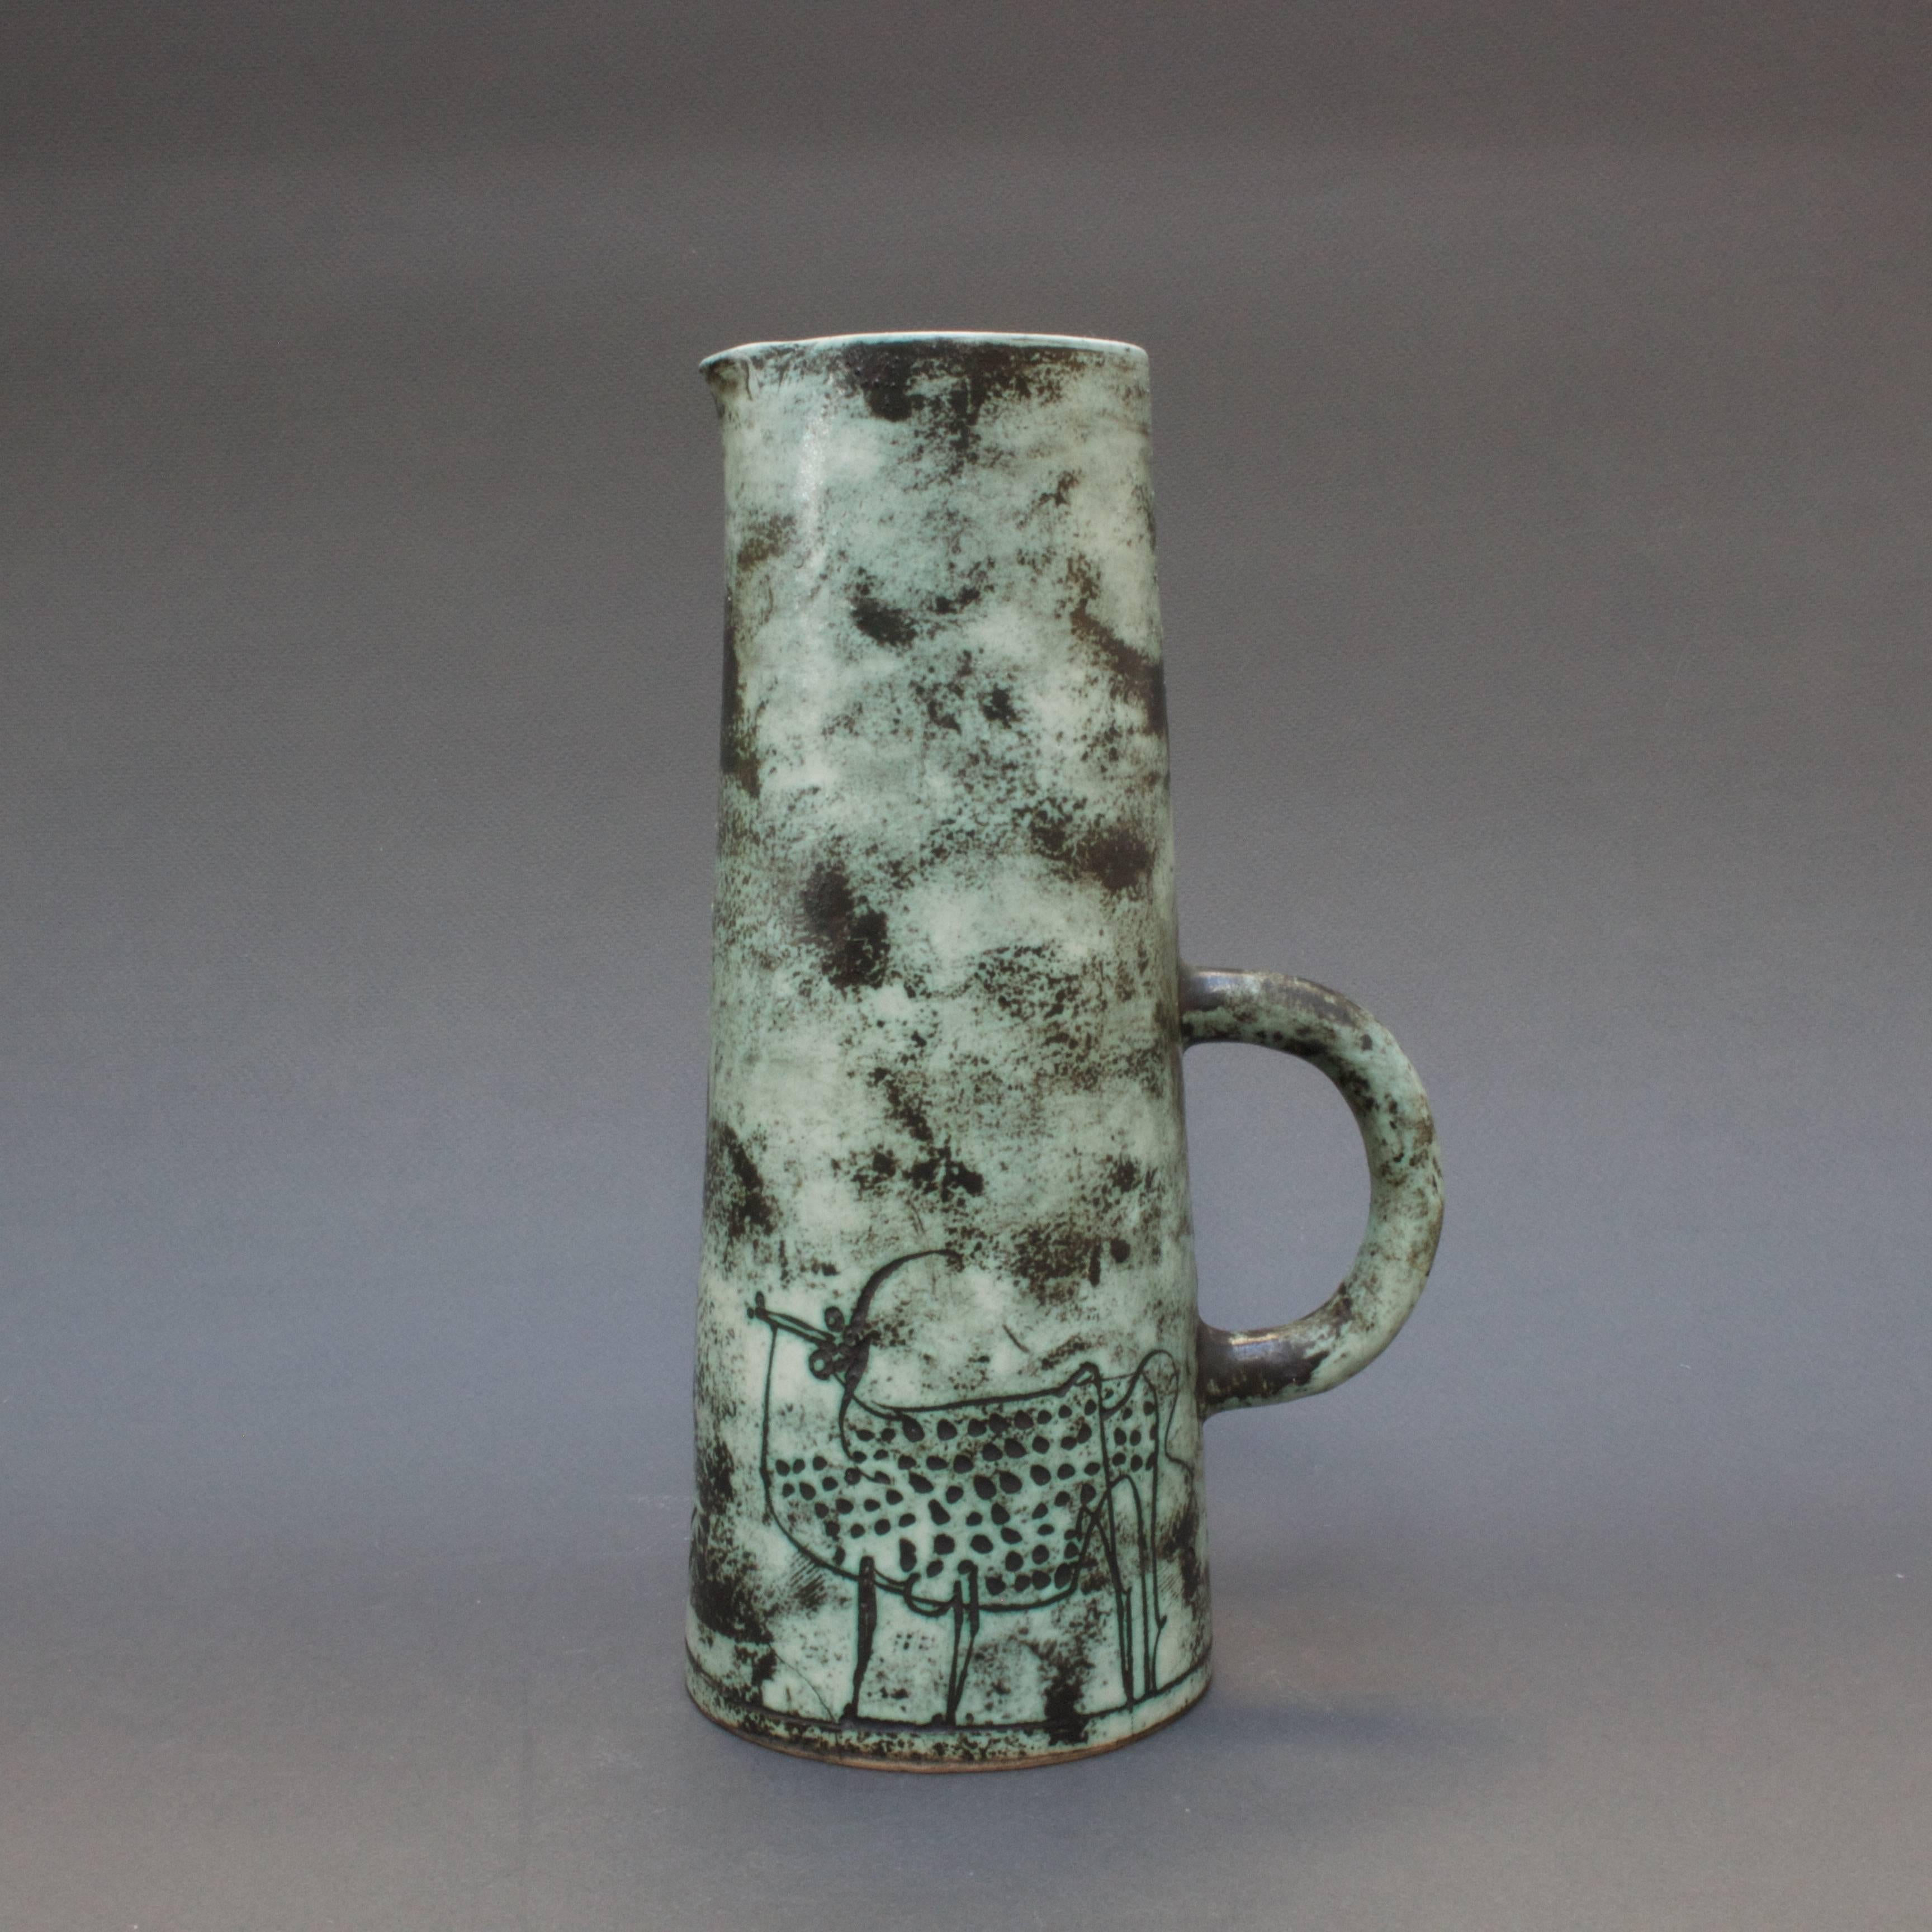 Ceramic Pitcher by Jacques Blin, Vallauris, France, circa 1950s - 60s 3